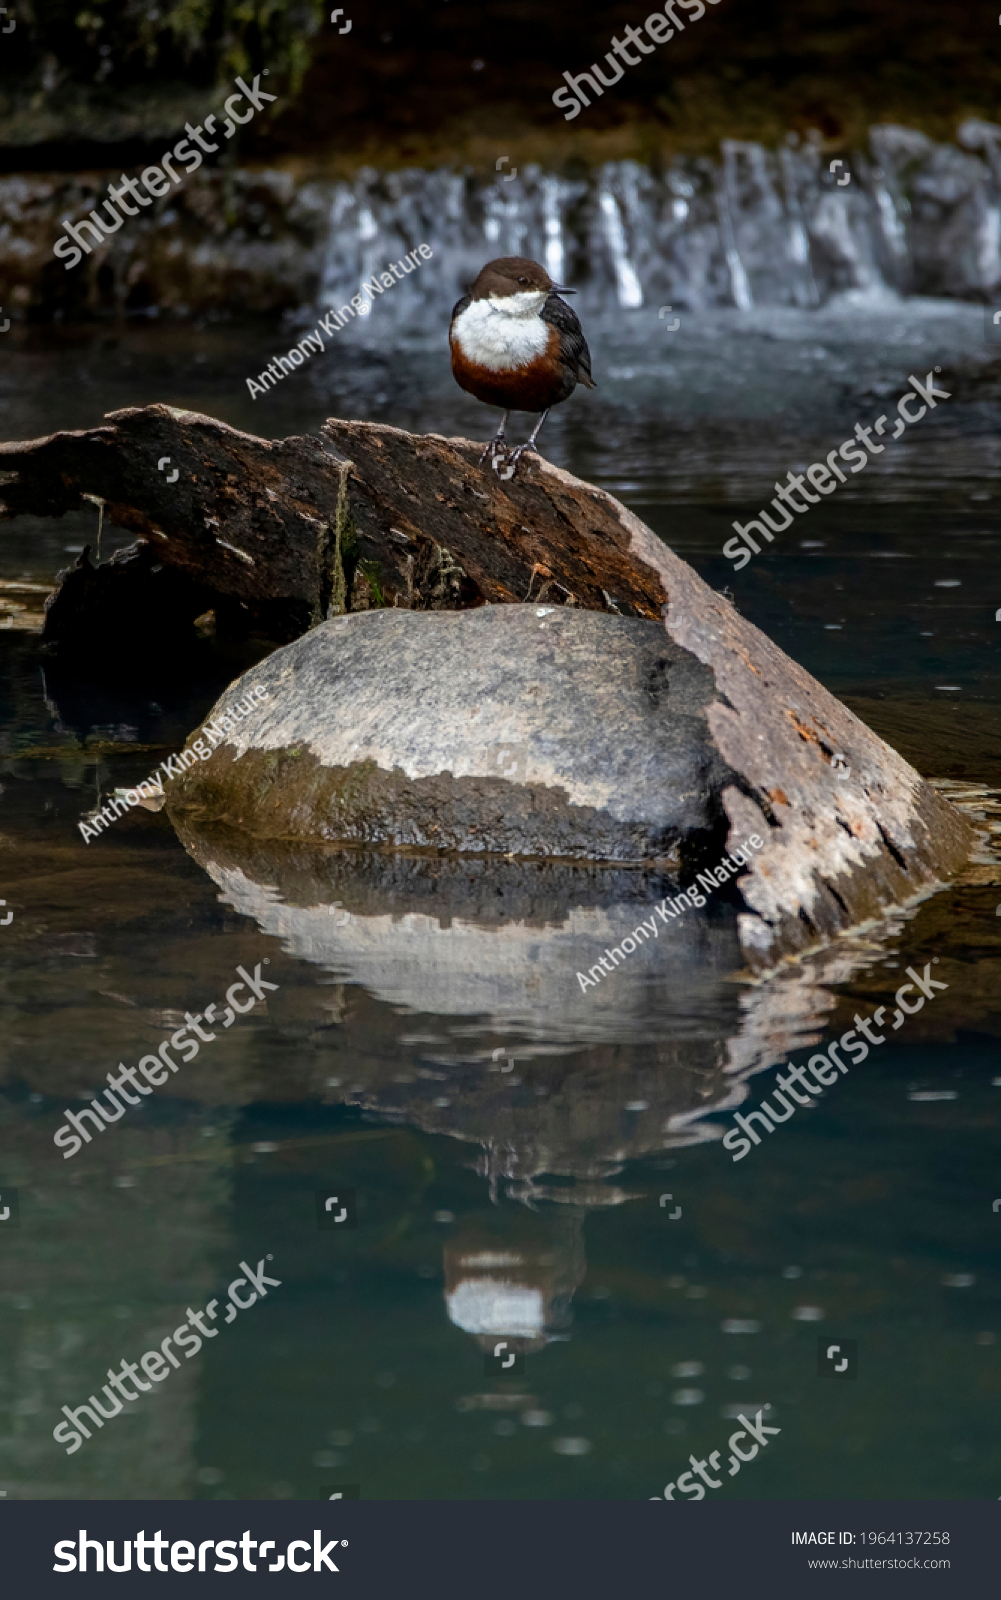 A Dipper perched on rusted industrial industrial waste in the river Cynon #1964137258